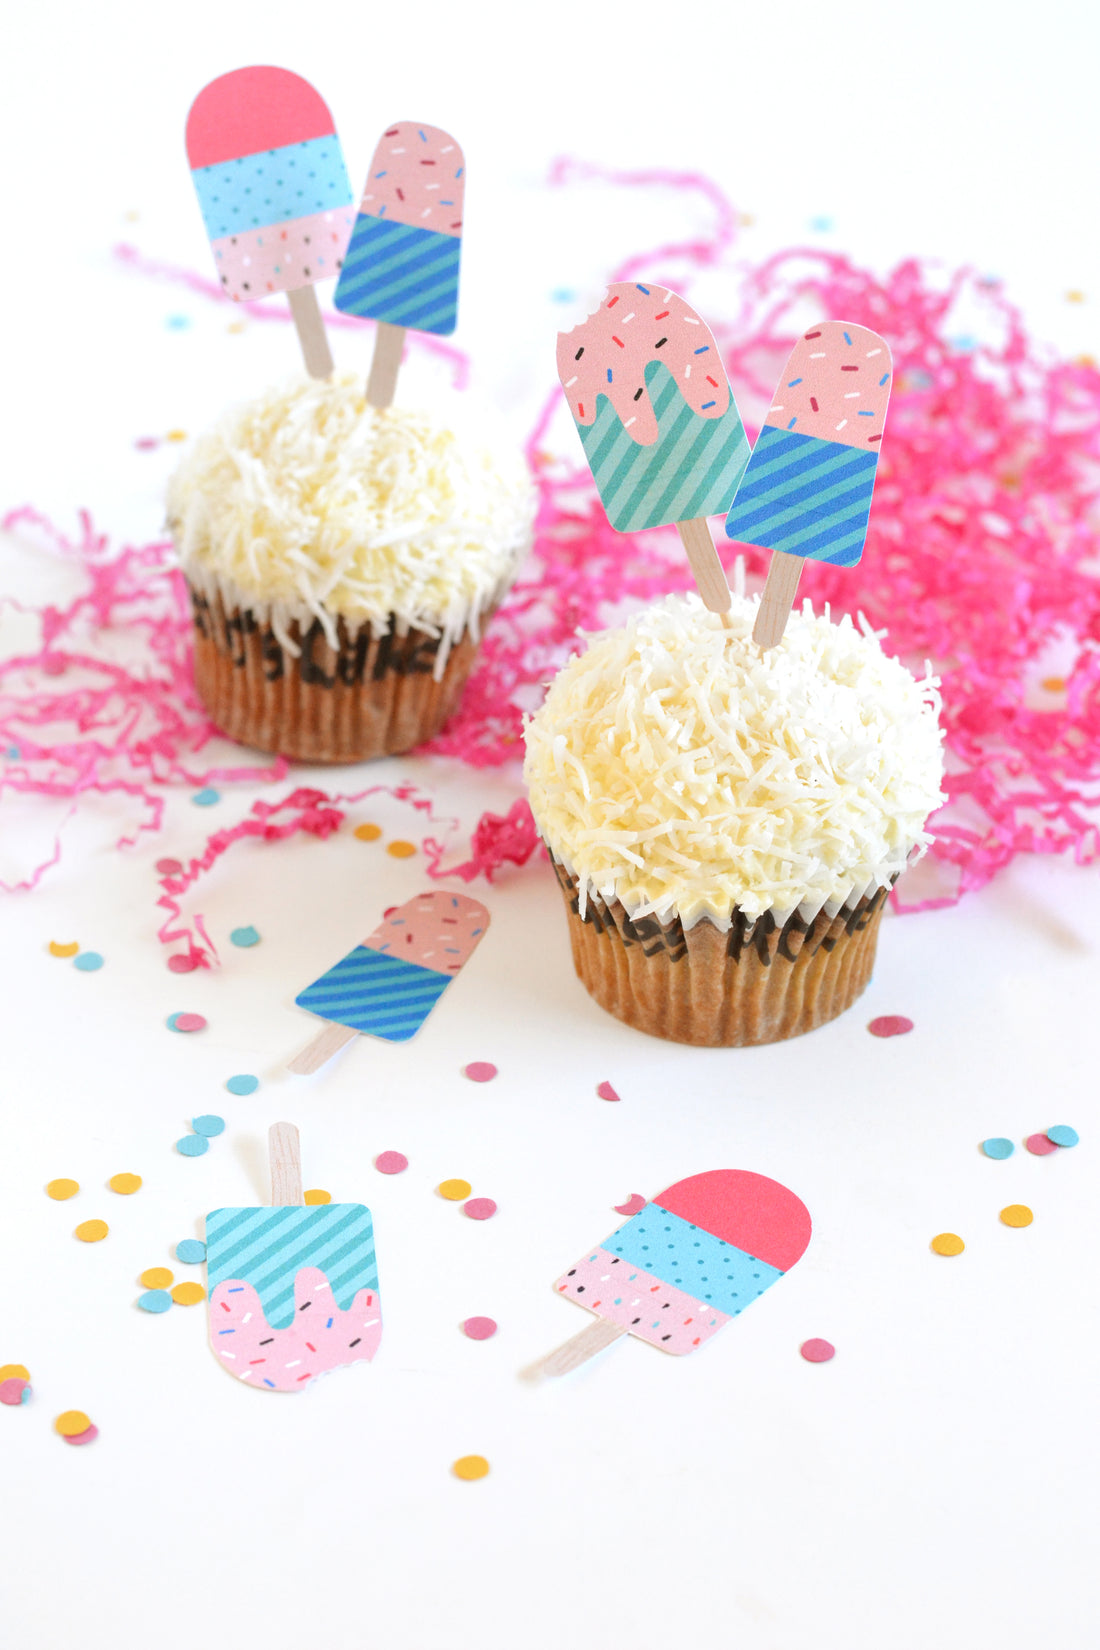 Printable popsicle cake toppers